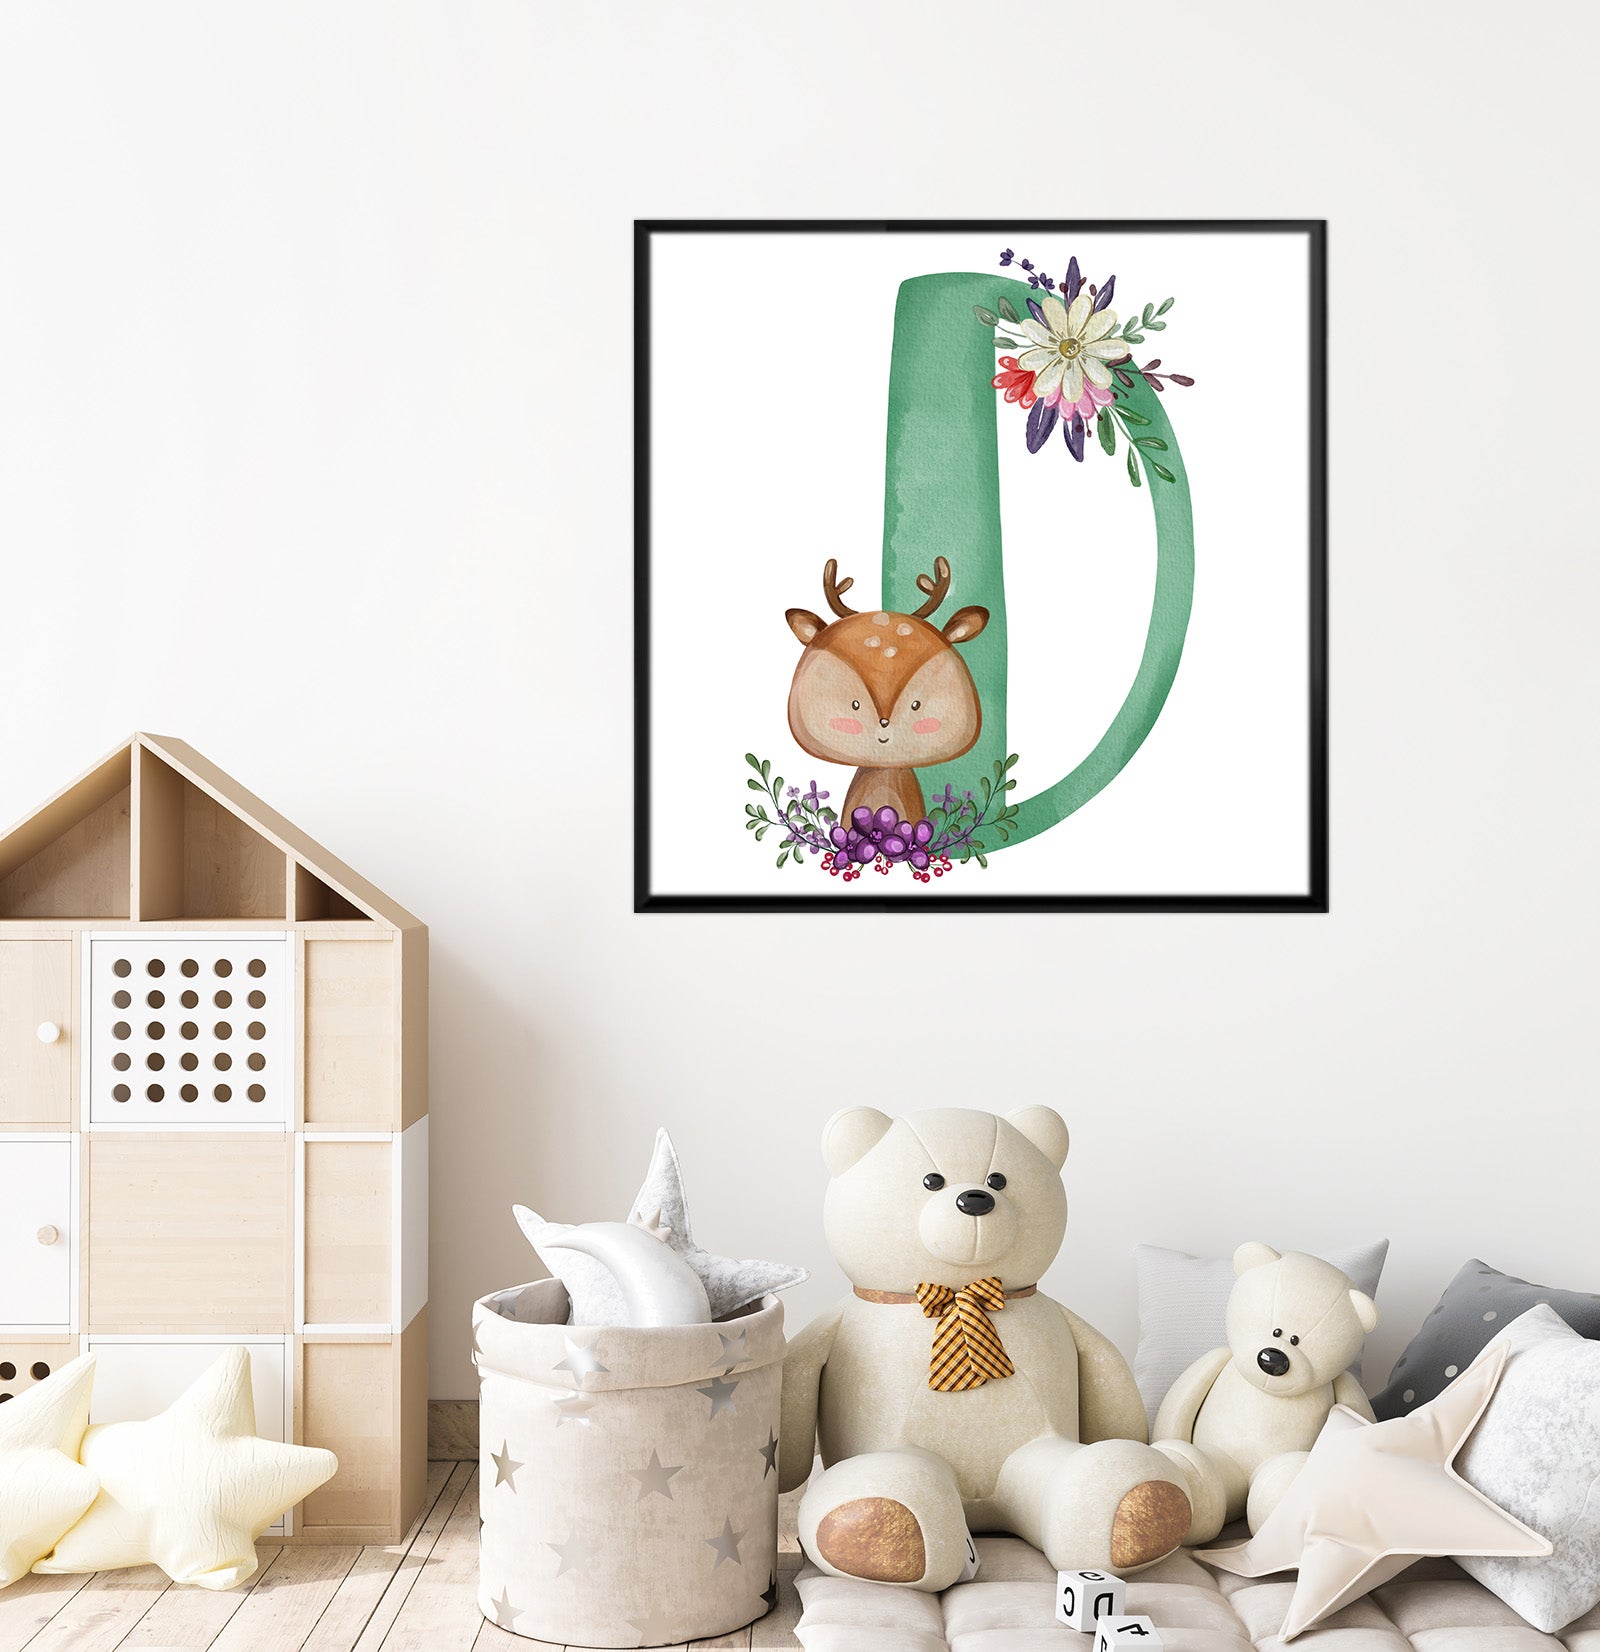 Wall Painting For Kid's Room (Letter D)